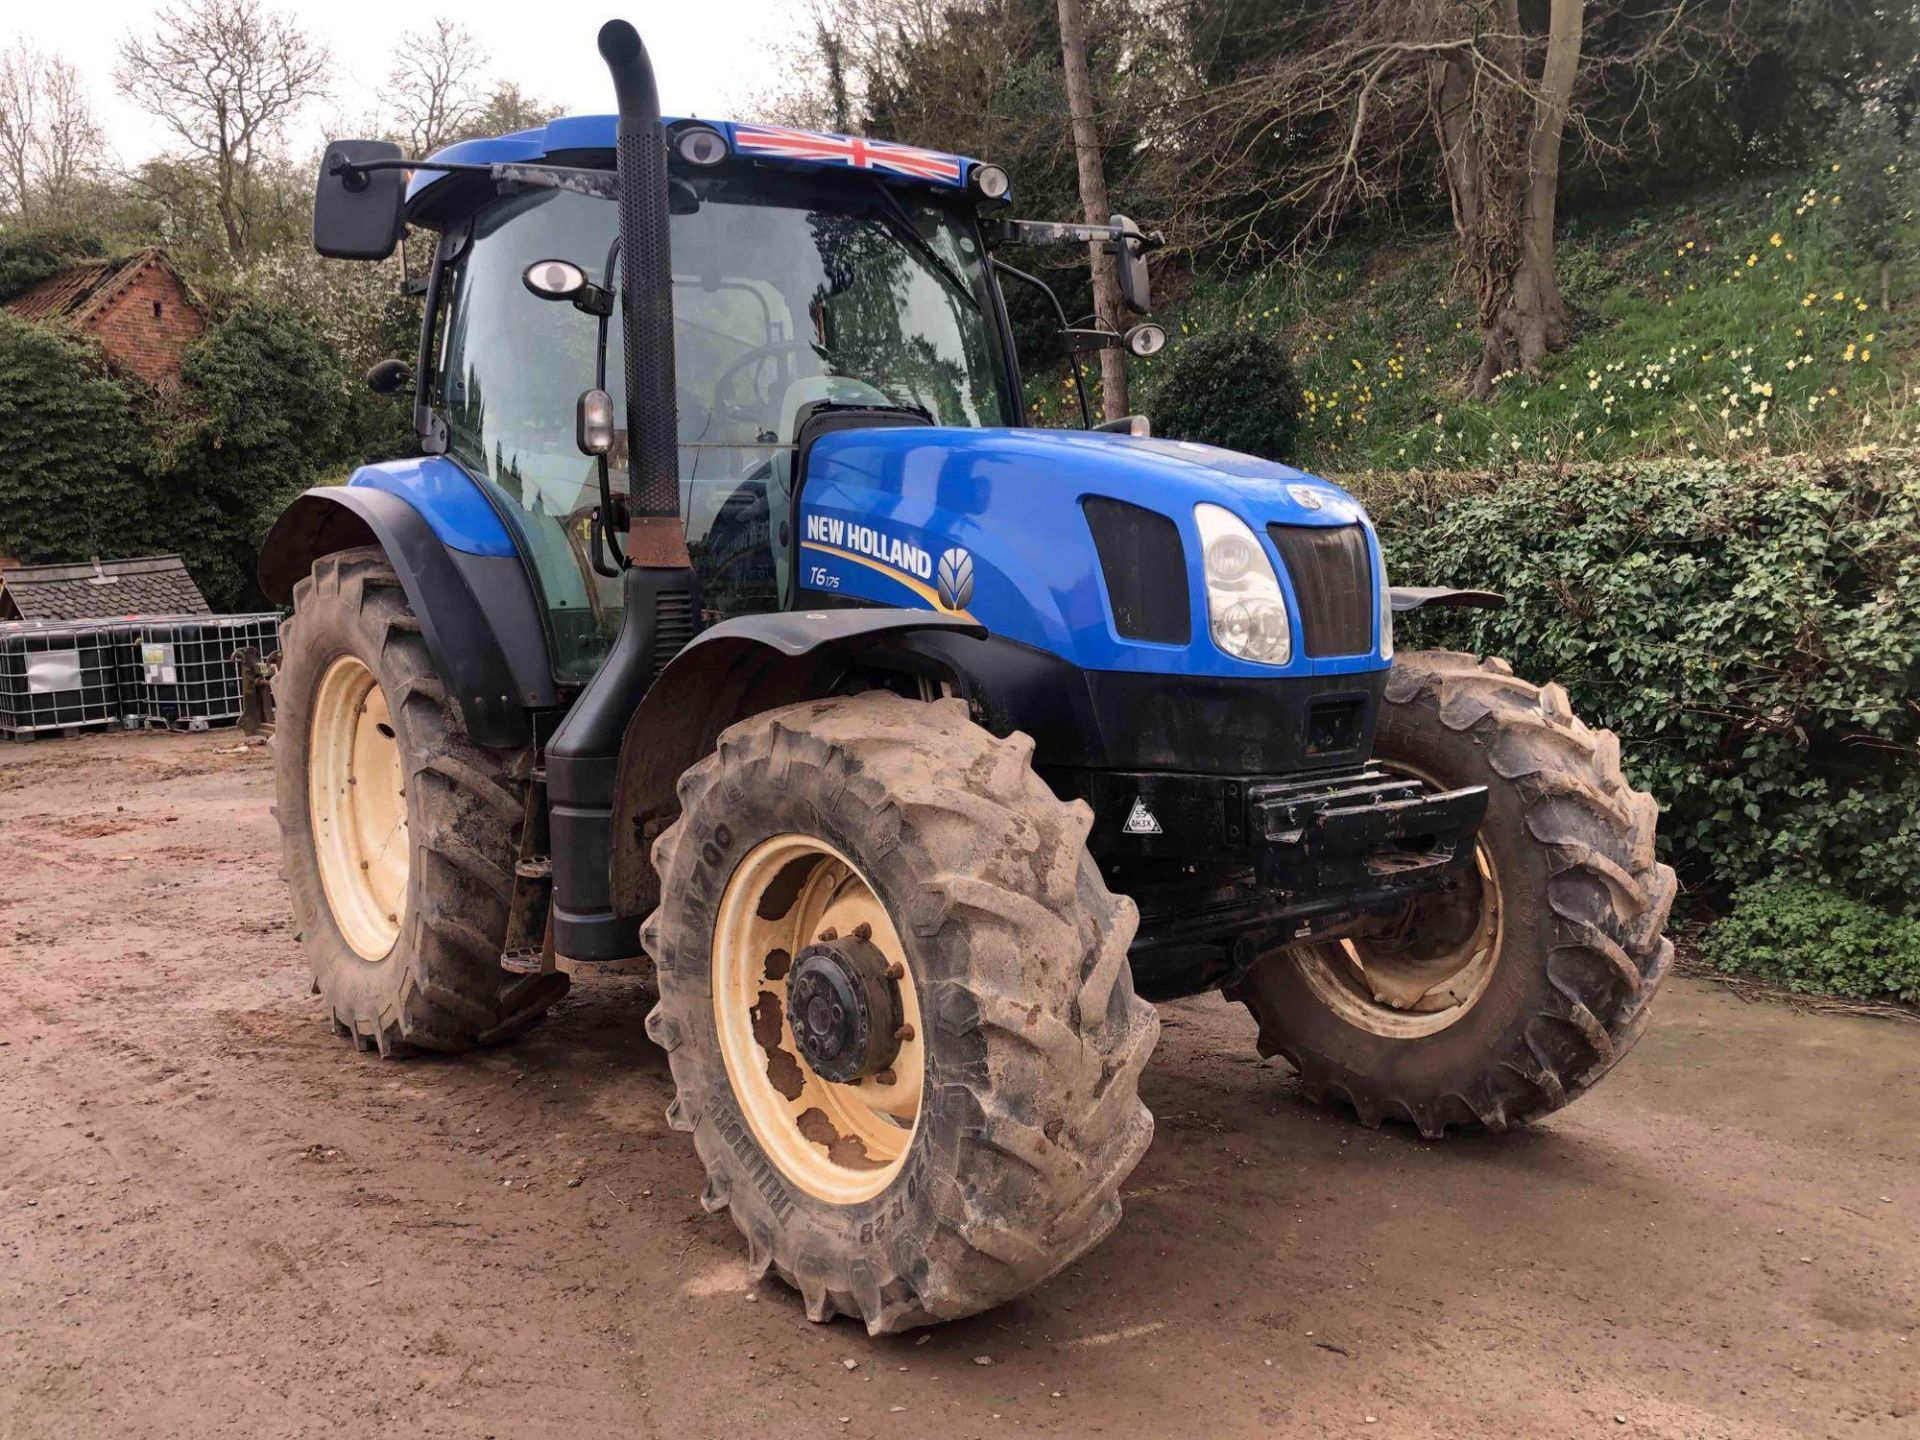 2013 New Holland T6.175 4wd tractor, 3 manual spools, air, on 420/70R28 front and 520/70R38 rear whe - Image 2 of 26